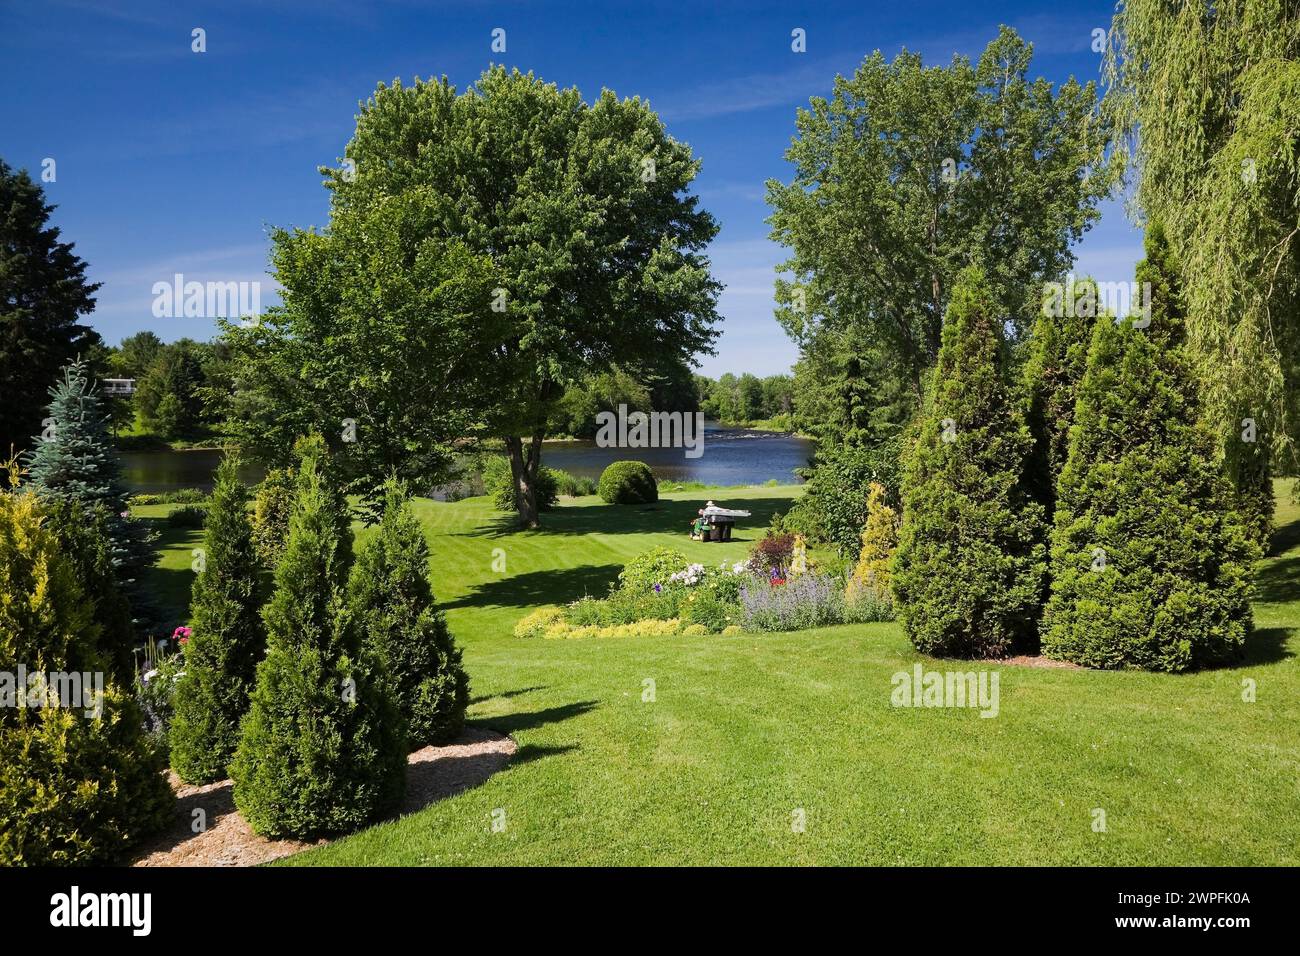 Manicured green grass lawn with trimmed Thuja - Cedar and deciduous trees in borders in backyard garden in late spring. Stock Photo